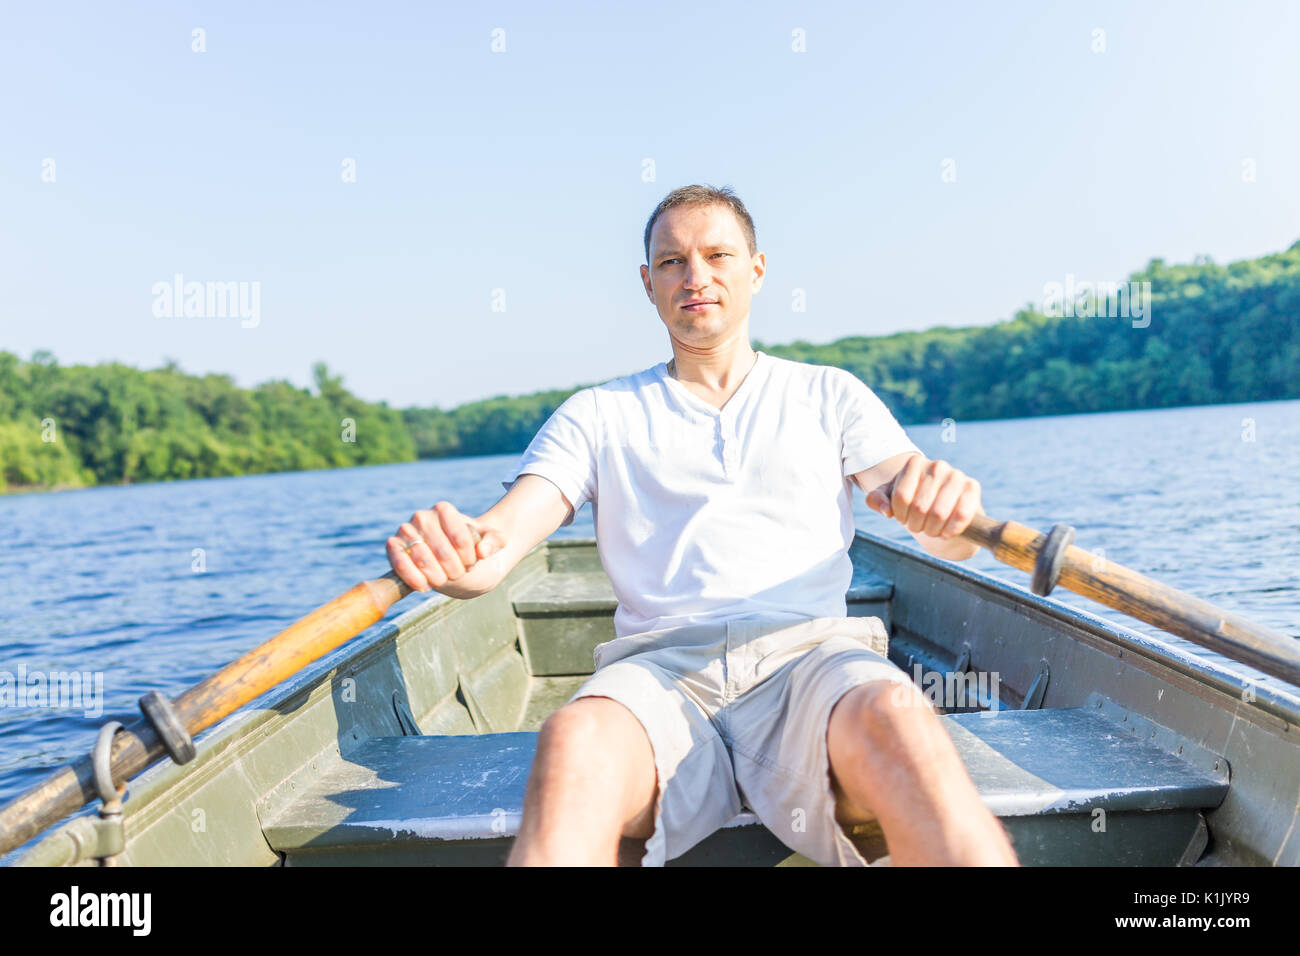 Serious young man rowing boat on lake in Virginia during summer in white shirt Stock Photo